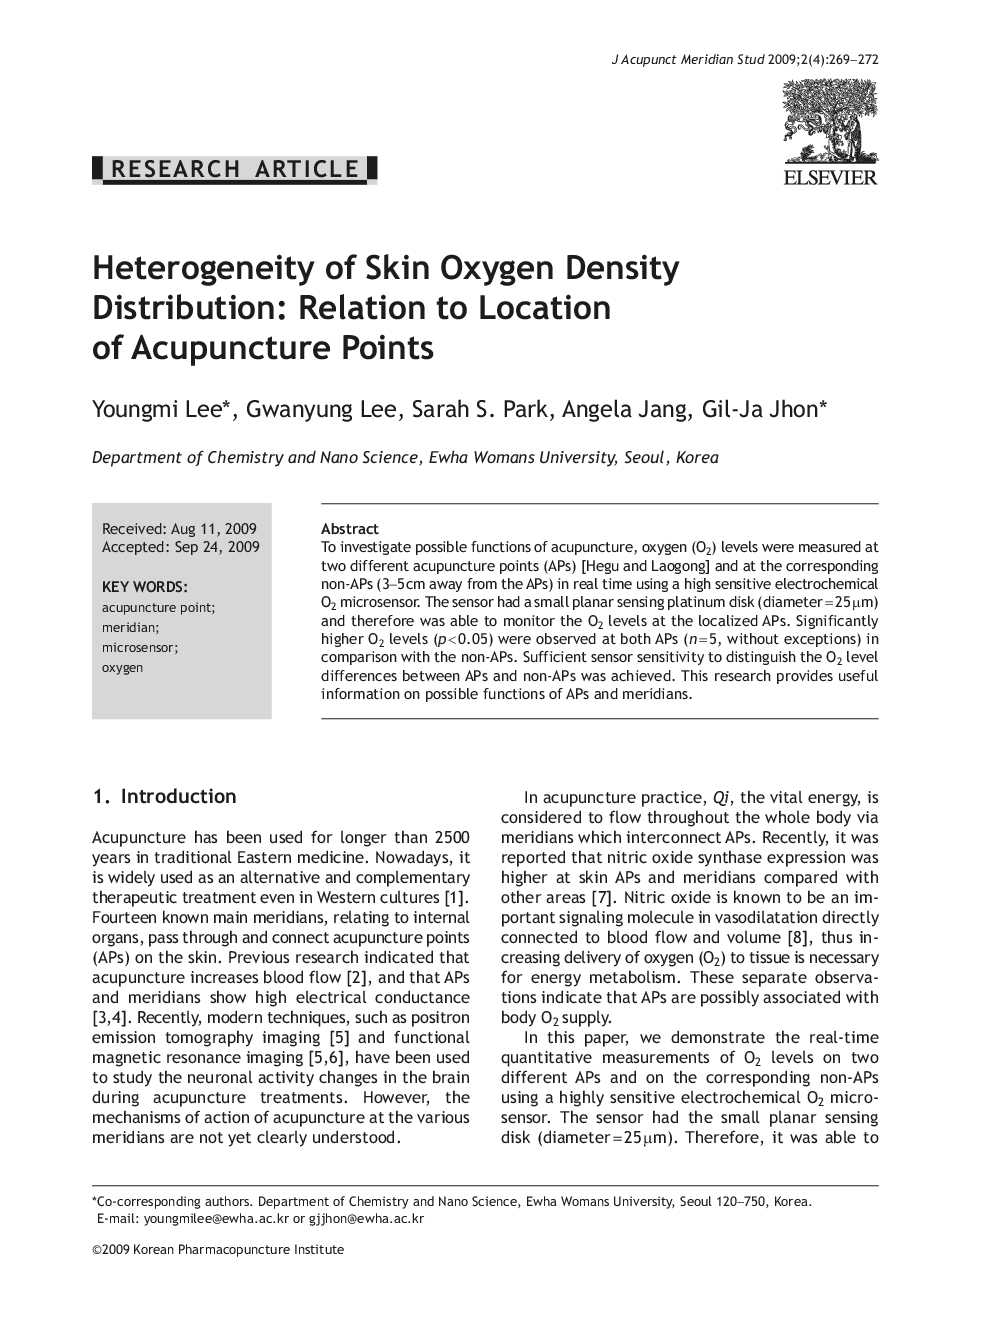 Heterogeneity of Skin Oxygen Density Distribution: Relation to Location of Acupuncture Points